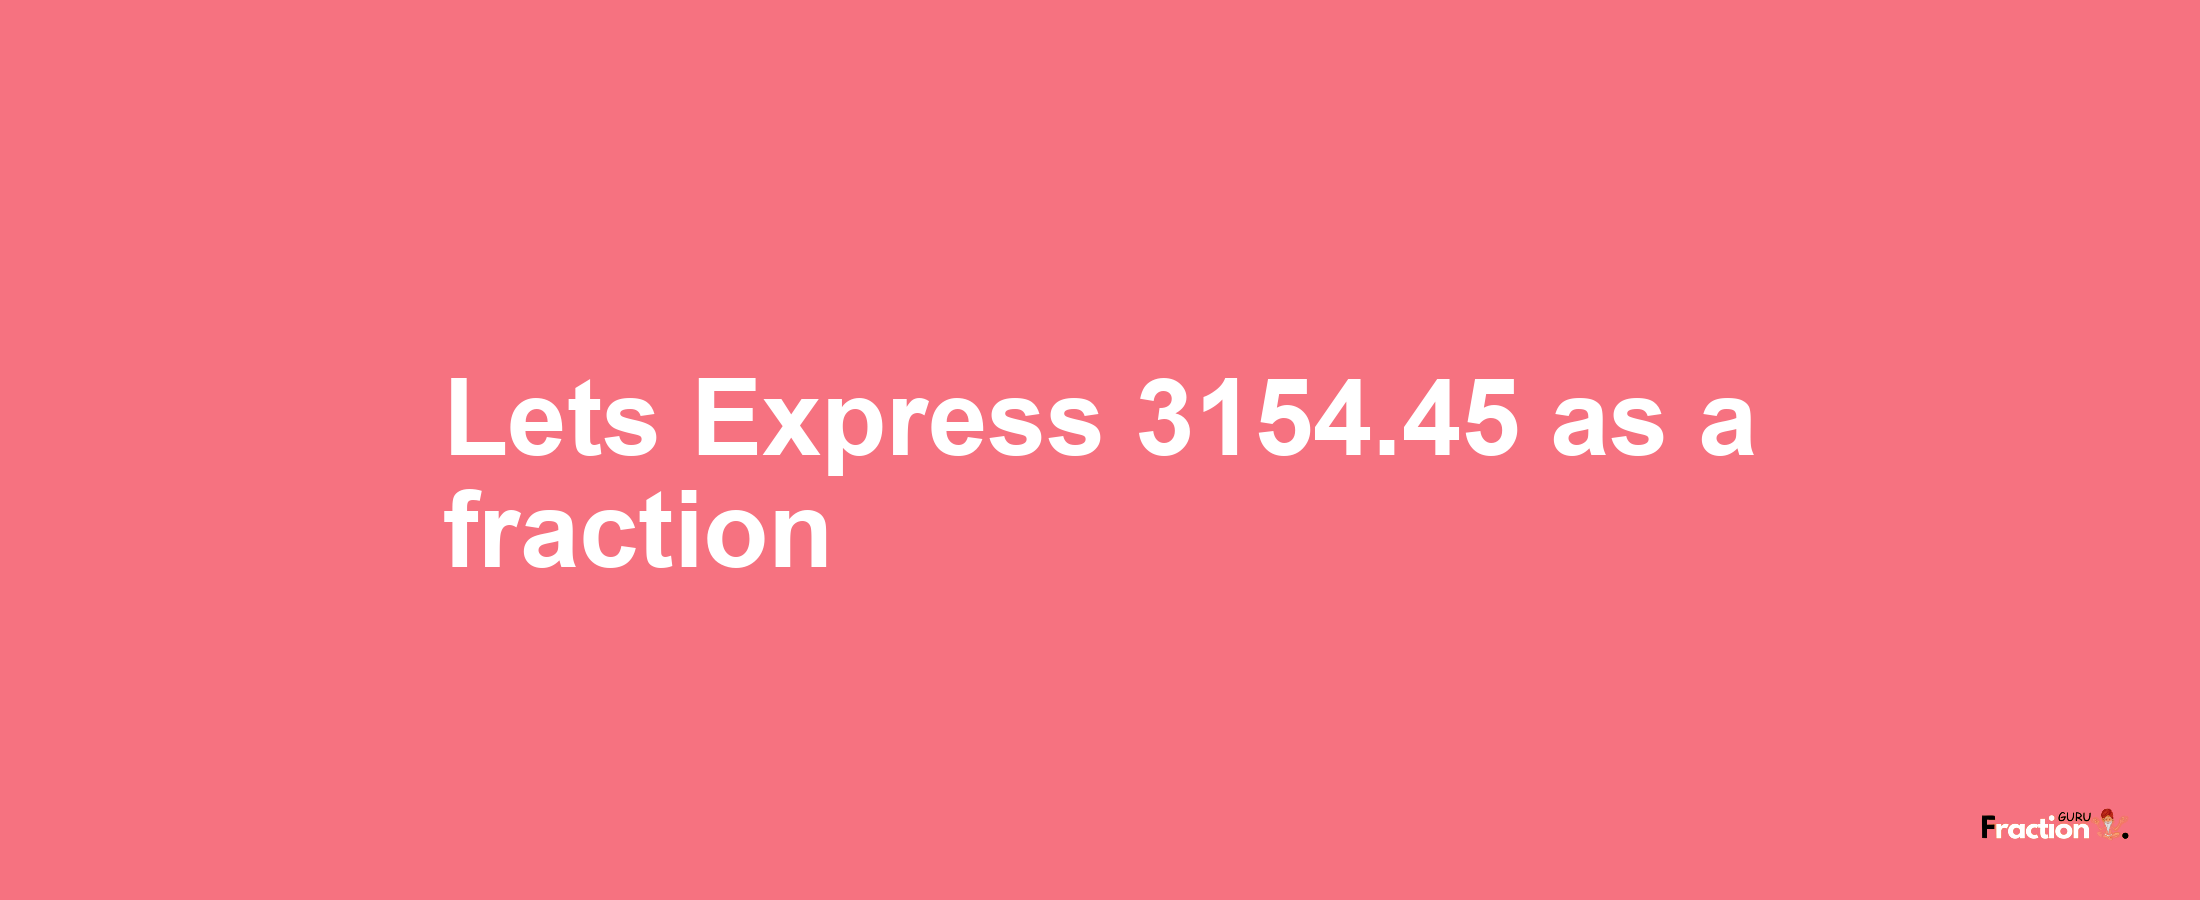 Lets Express 3154.45 as afraction